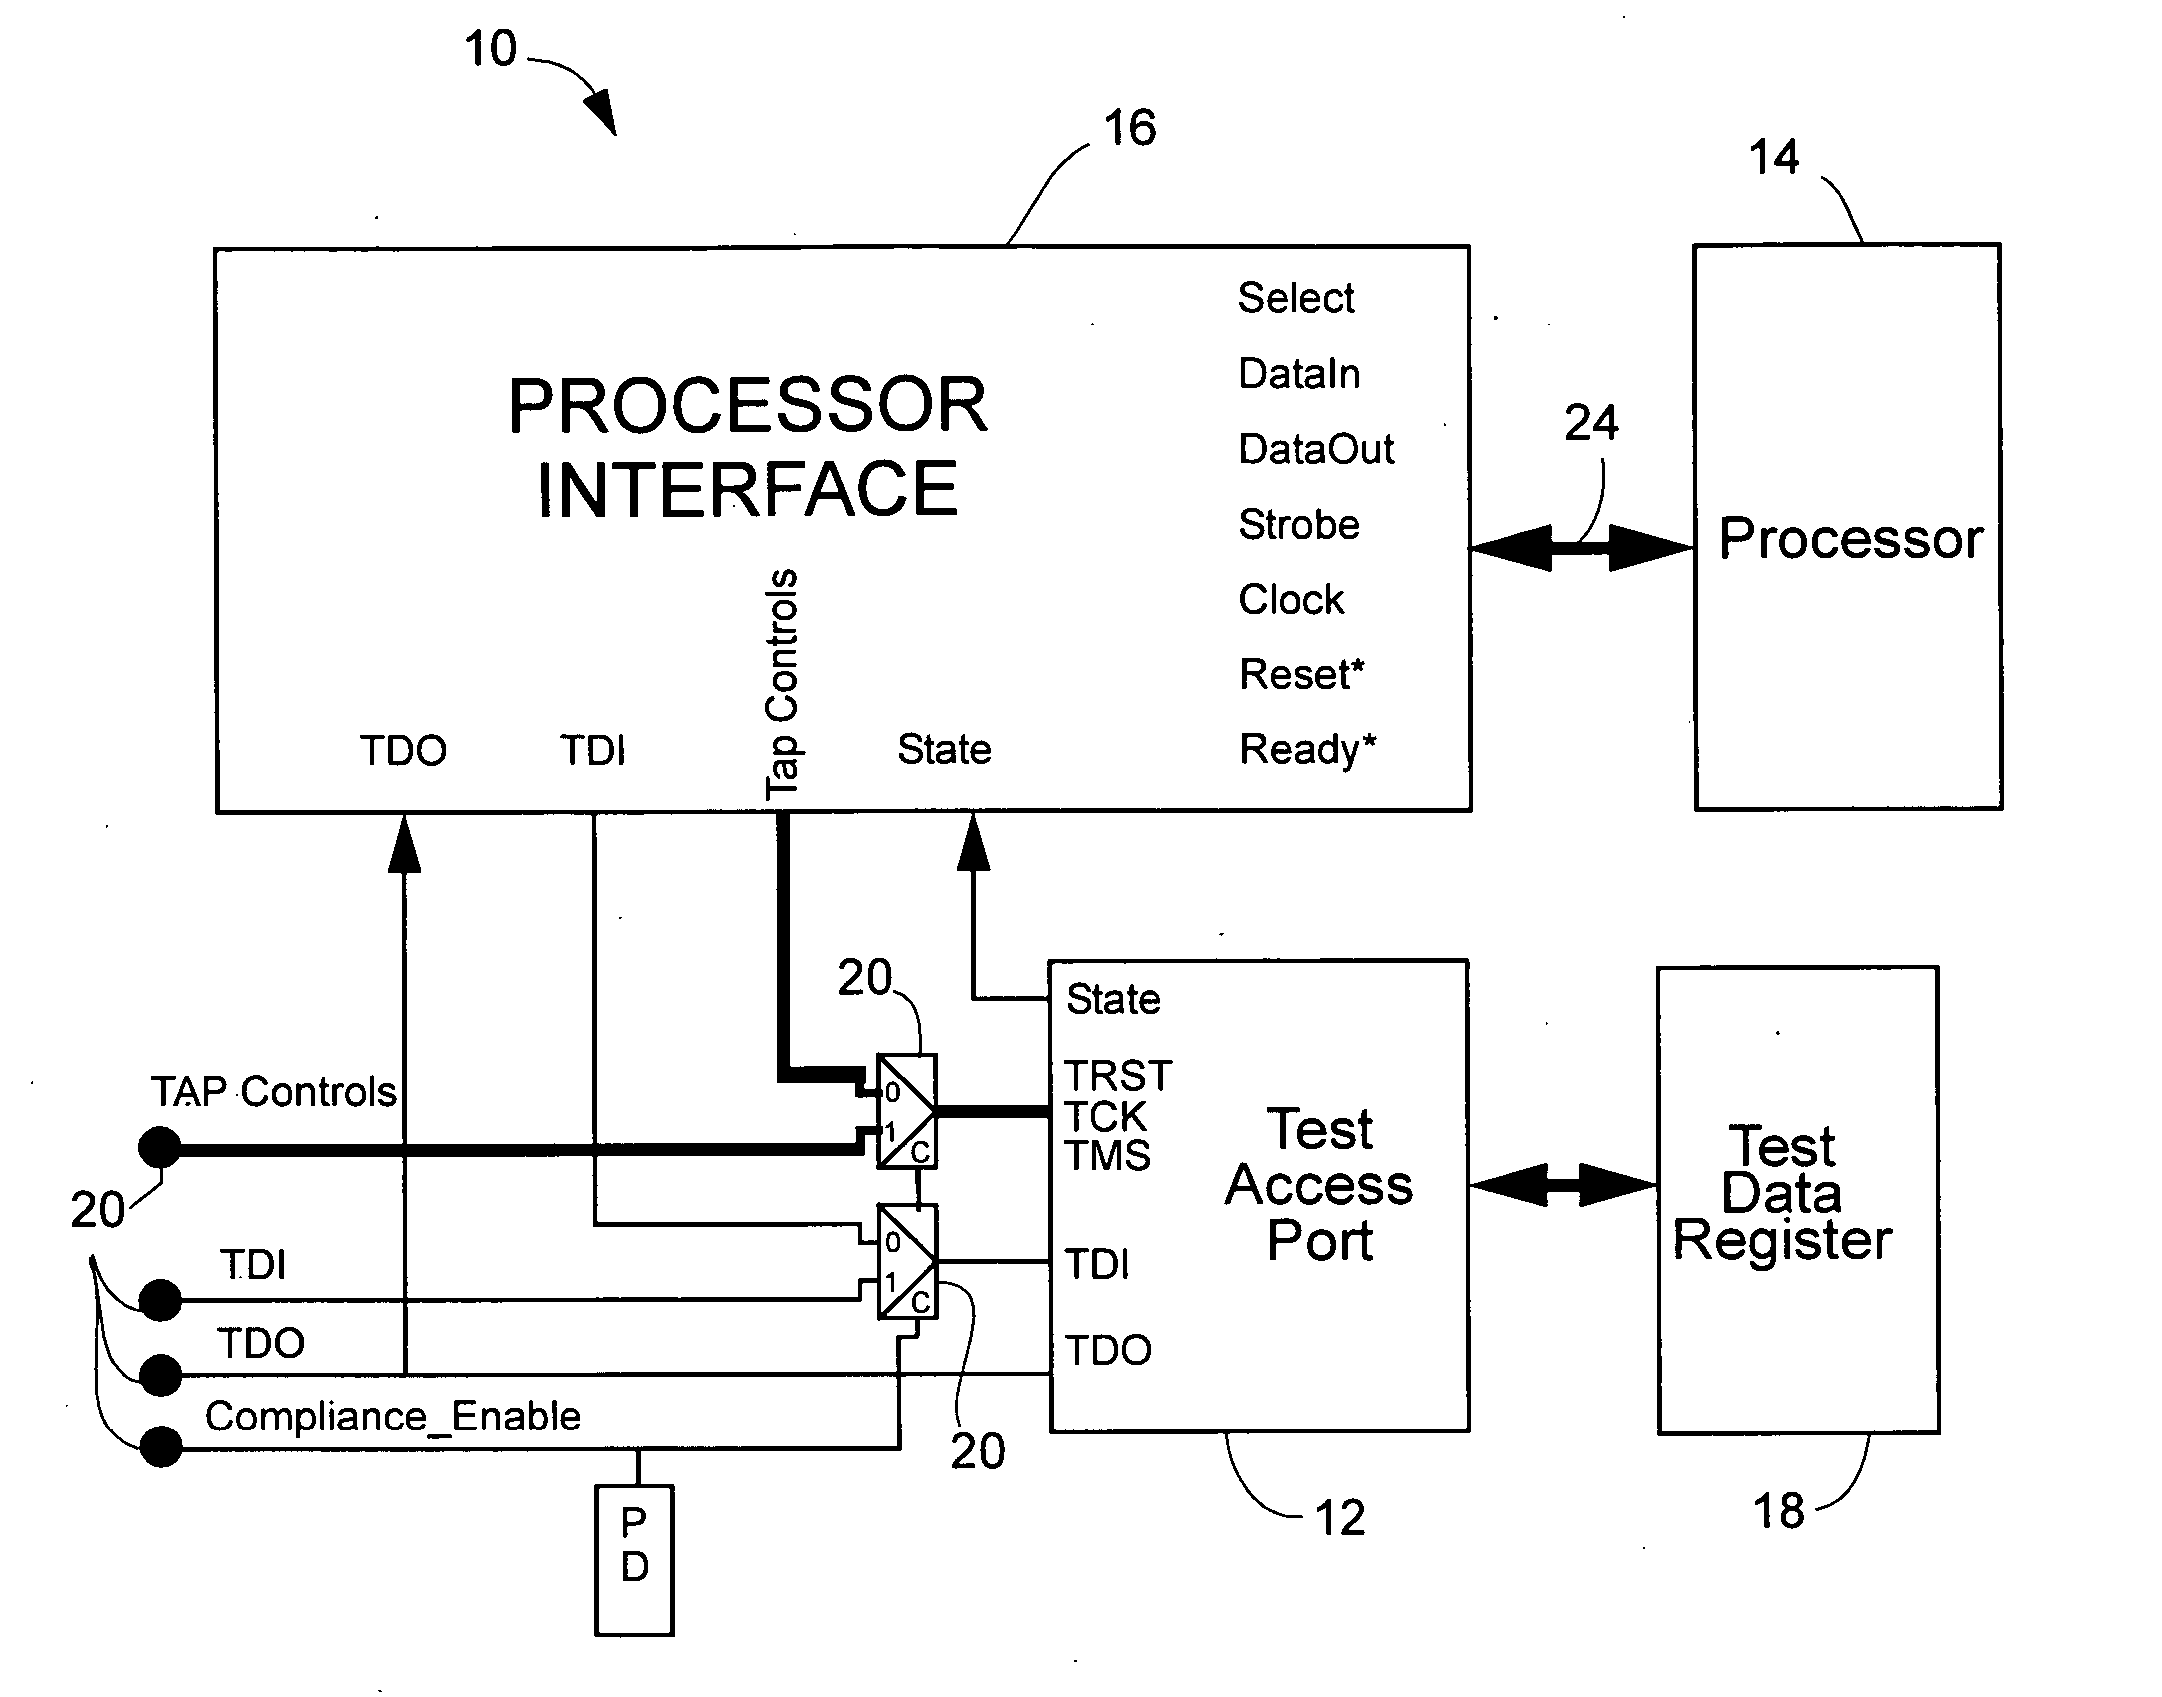 Processor interface for test access port